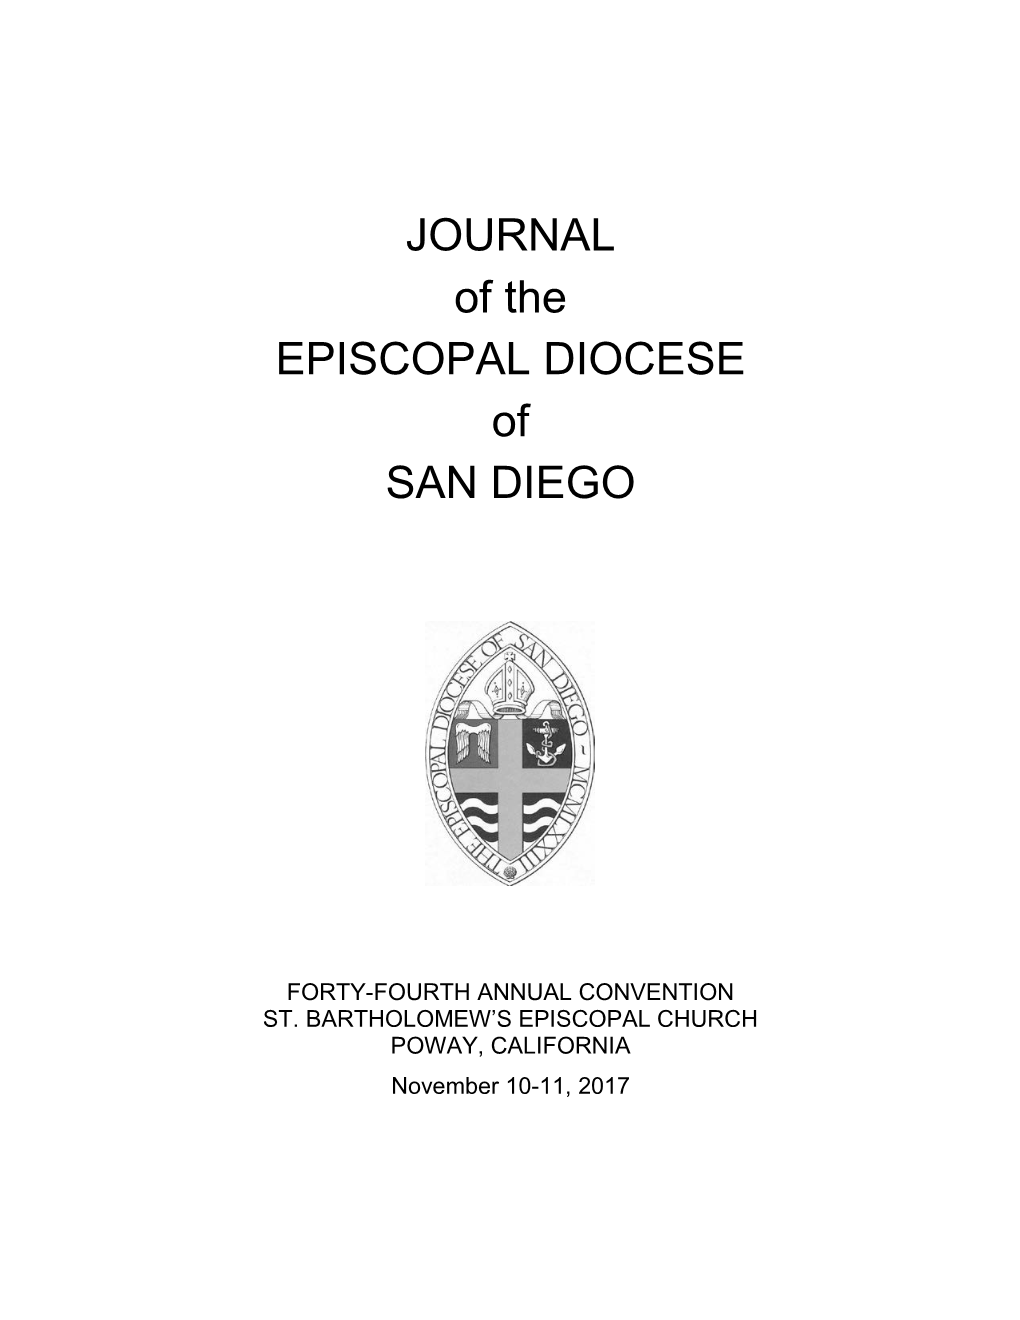 JOURNAL of the EPISCOPAL DIOCESE of SAN DIEGO